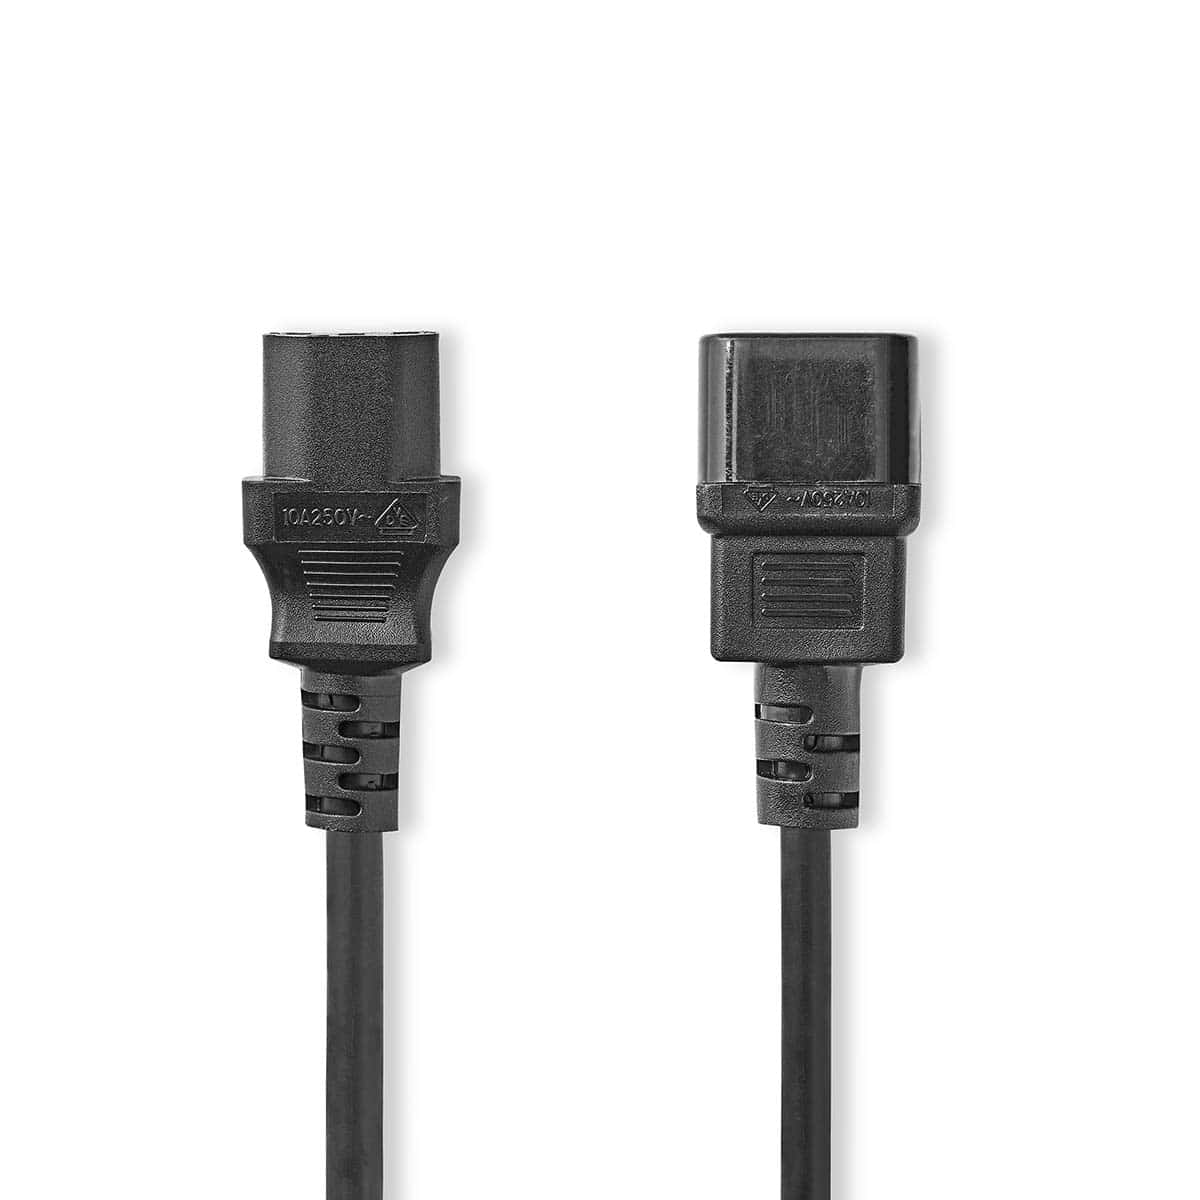 Nedis Power Extension Cable | 5 meters 